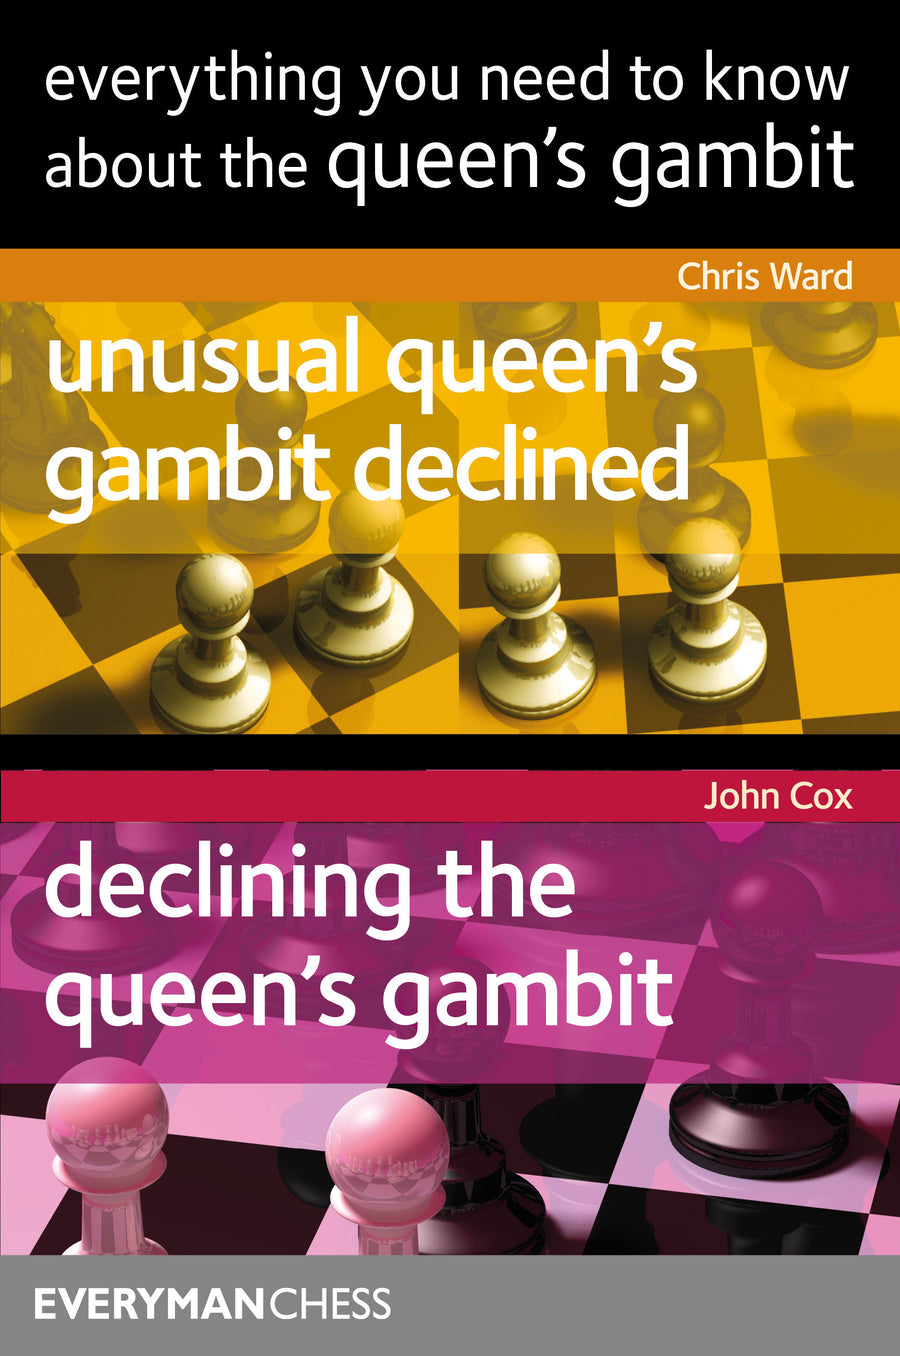 Everything You Need to Know About the Queen's Gambit